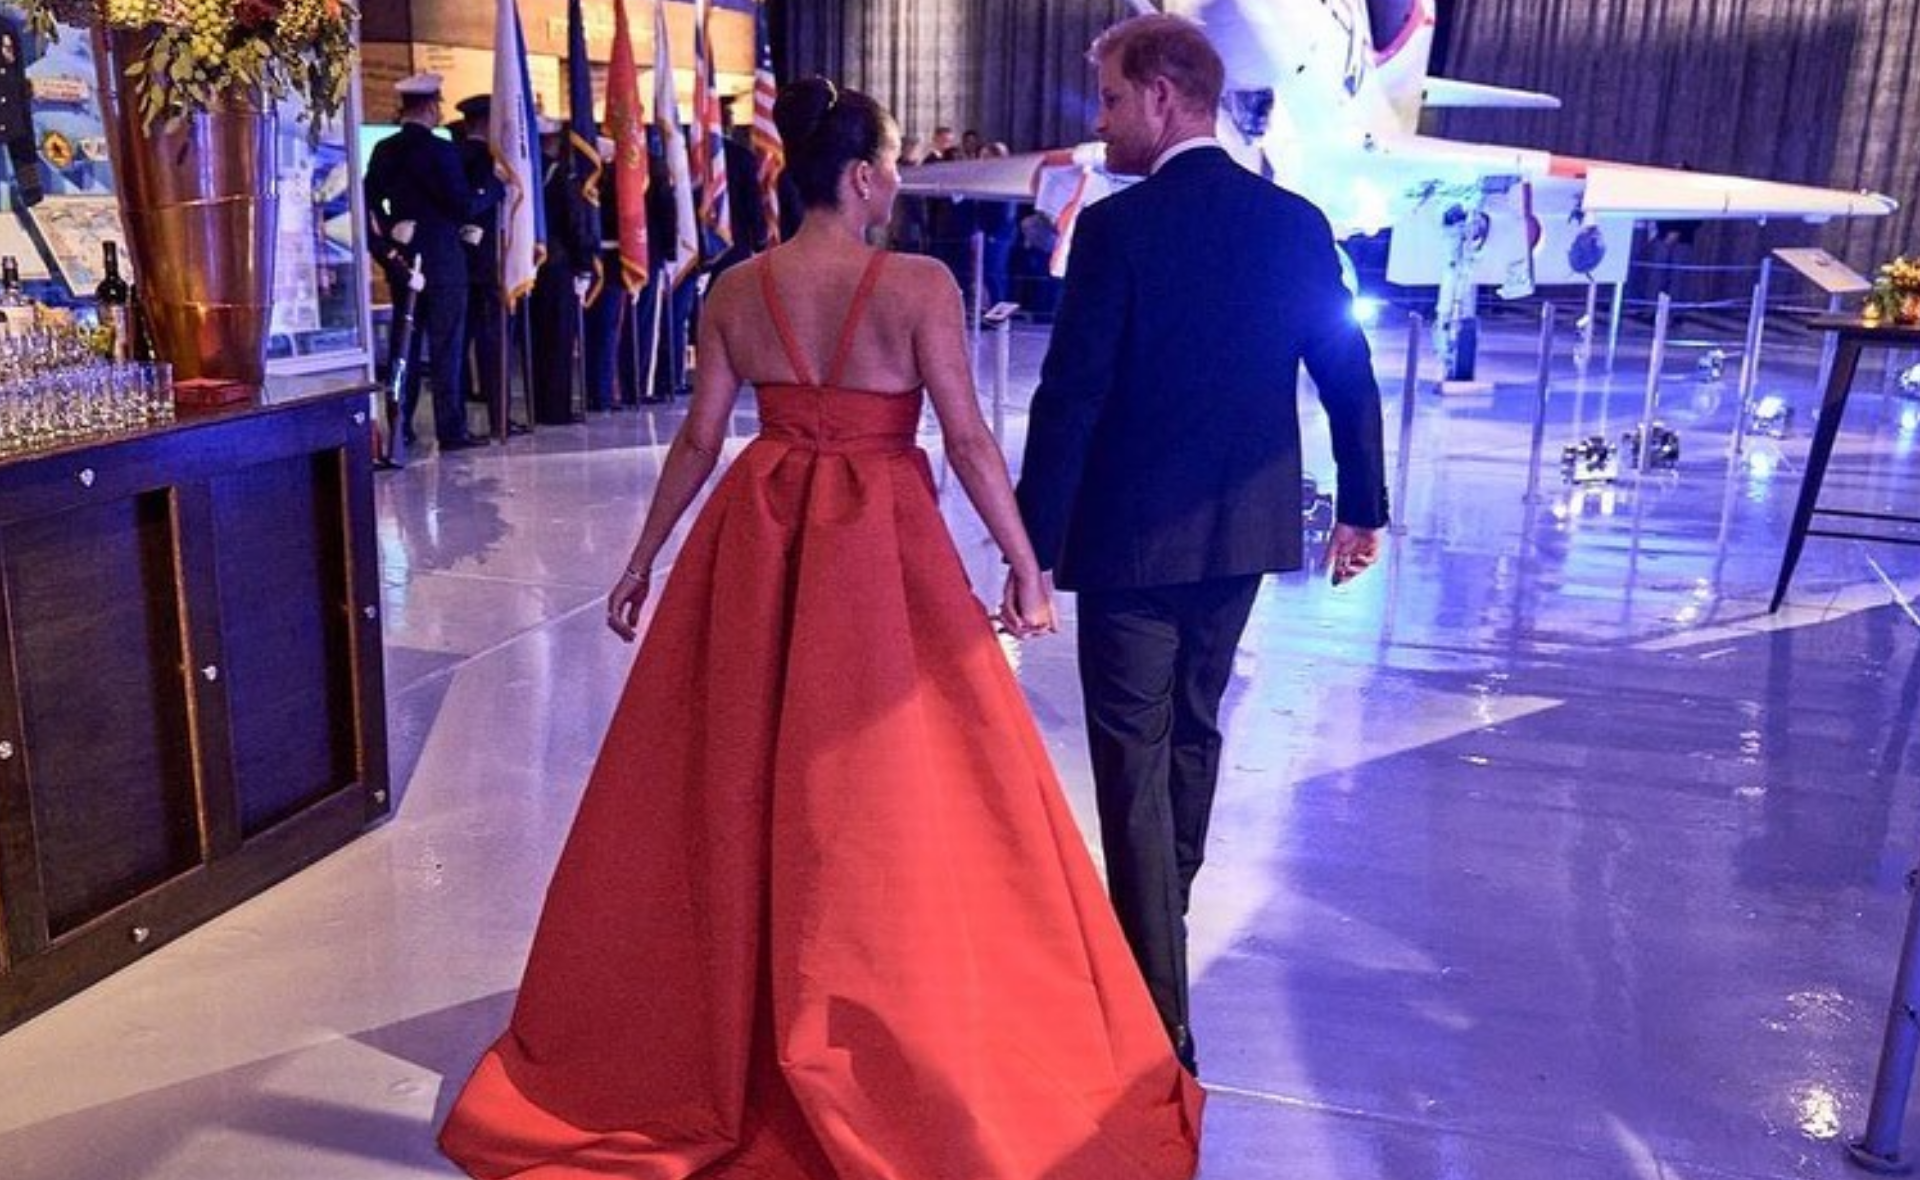 The look of love! New photos emerge of Prince Harry and Meghan, Duchess of Sussex’s glamorous night out